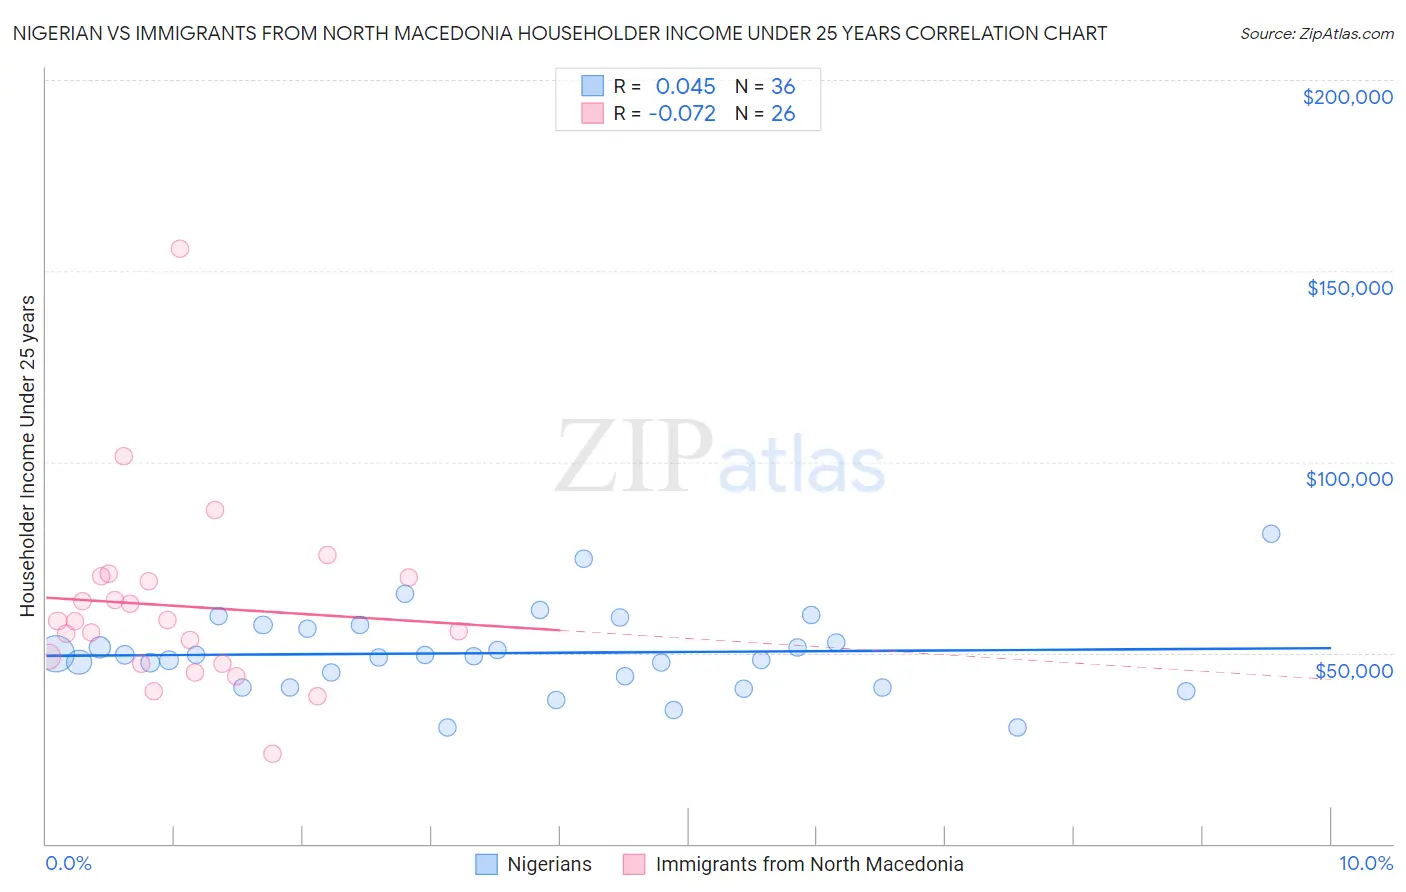 Nigerian vs Immigrants from North Macedonia Householder Income Under 25 years